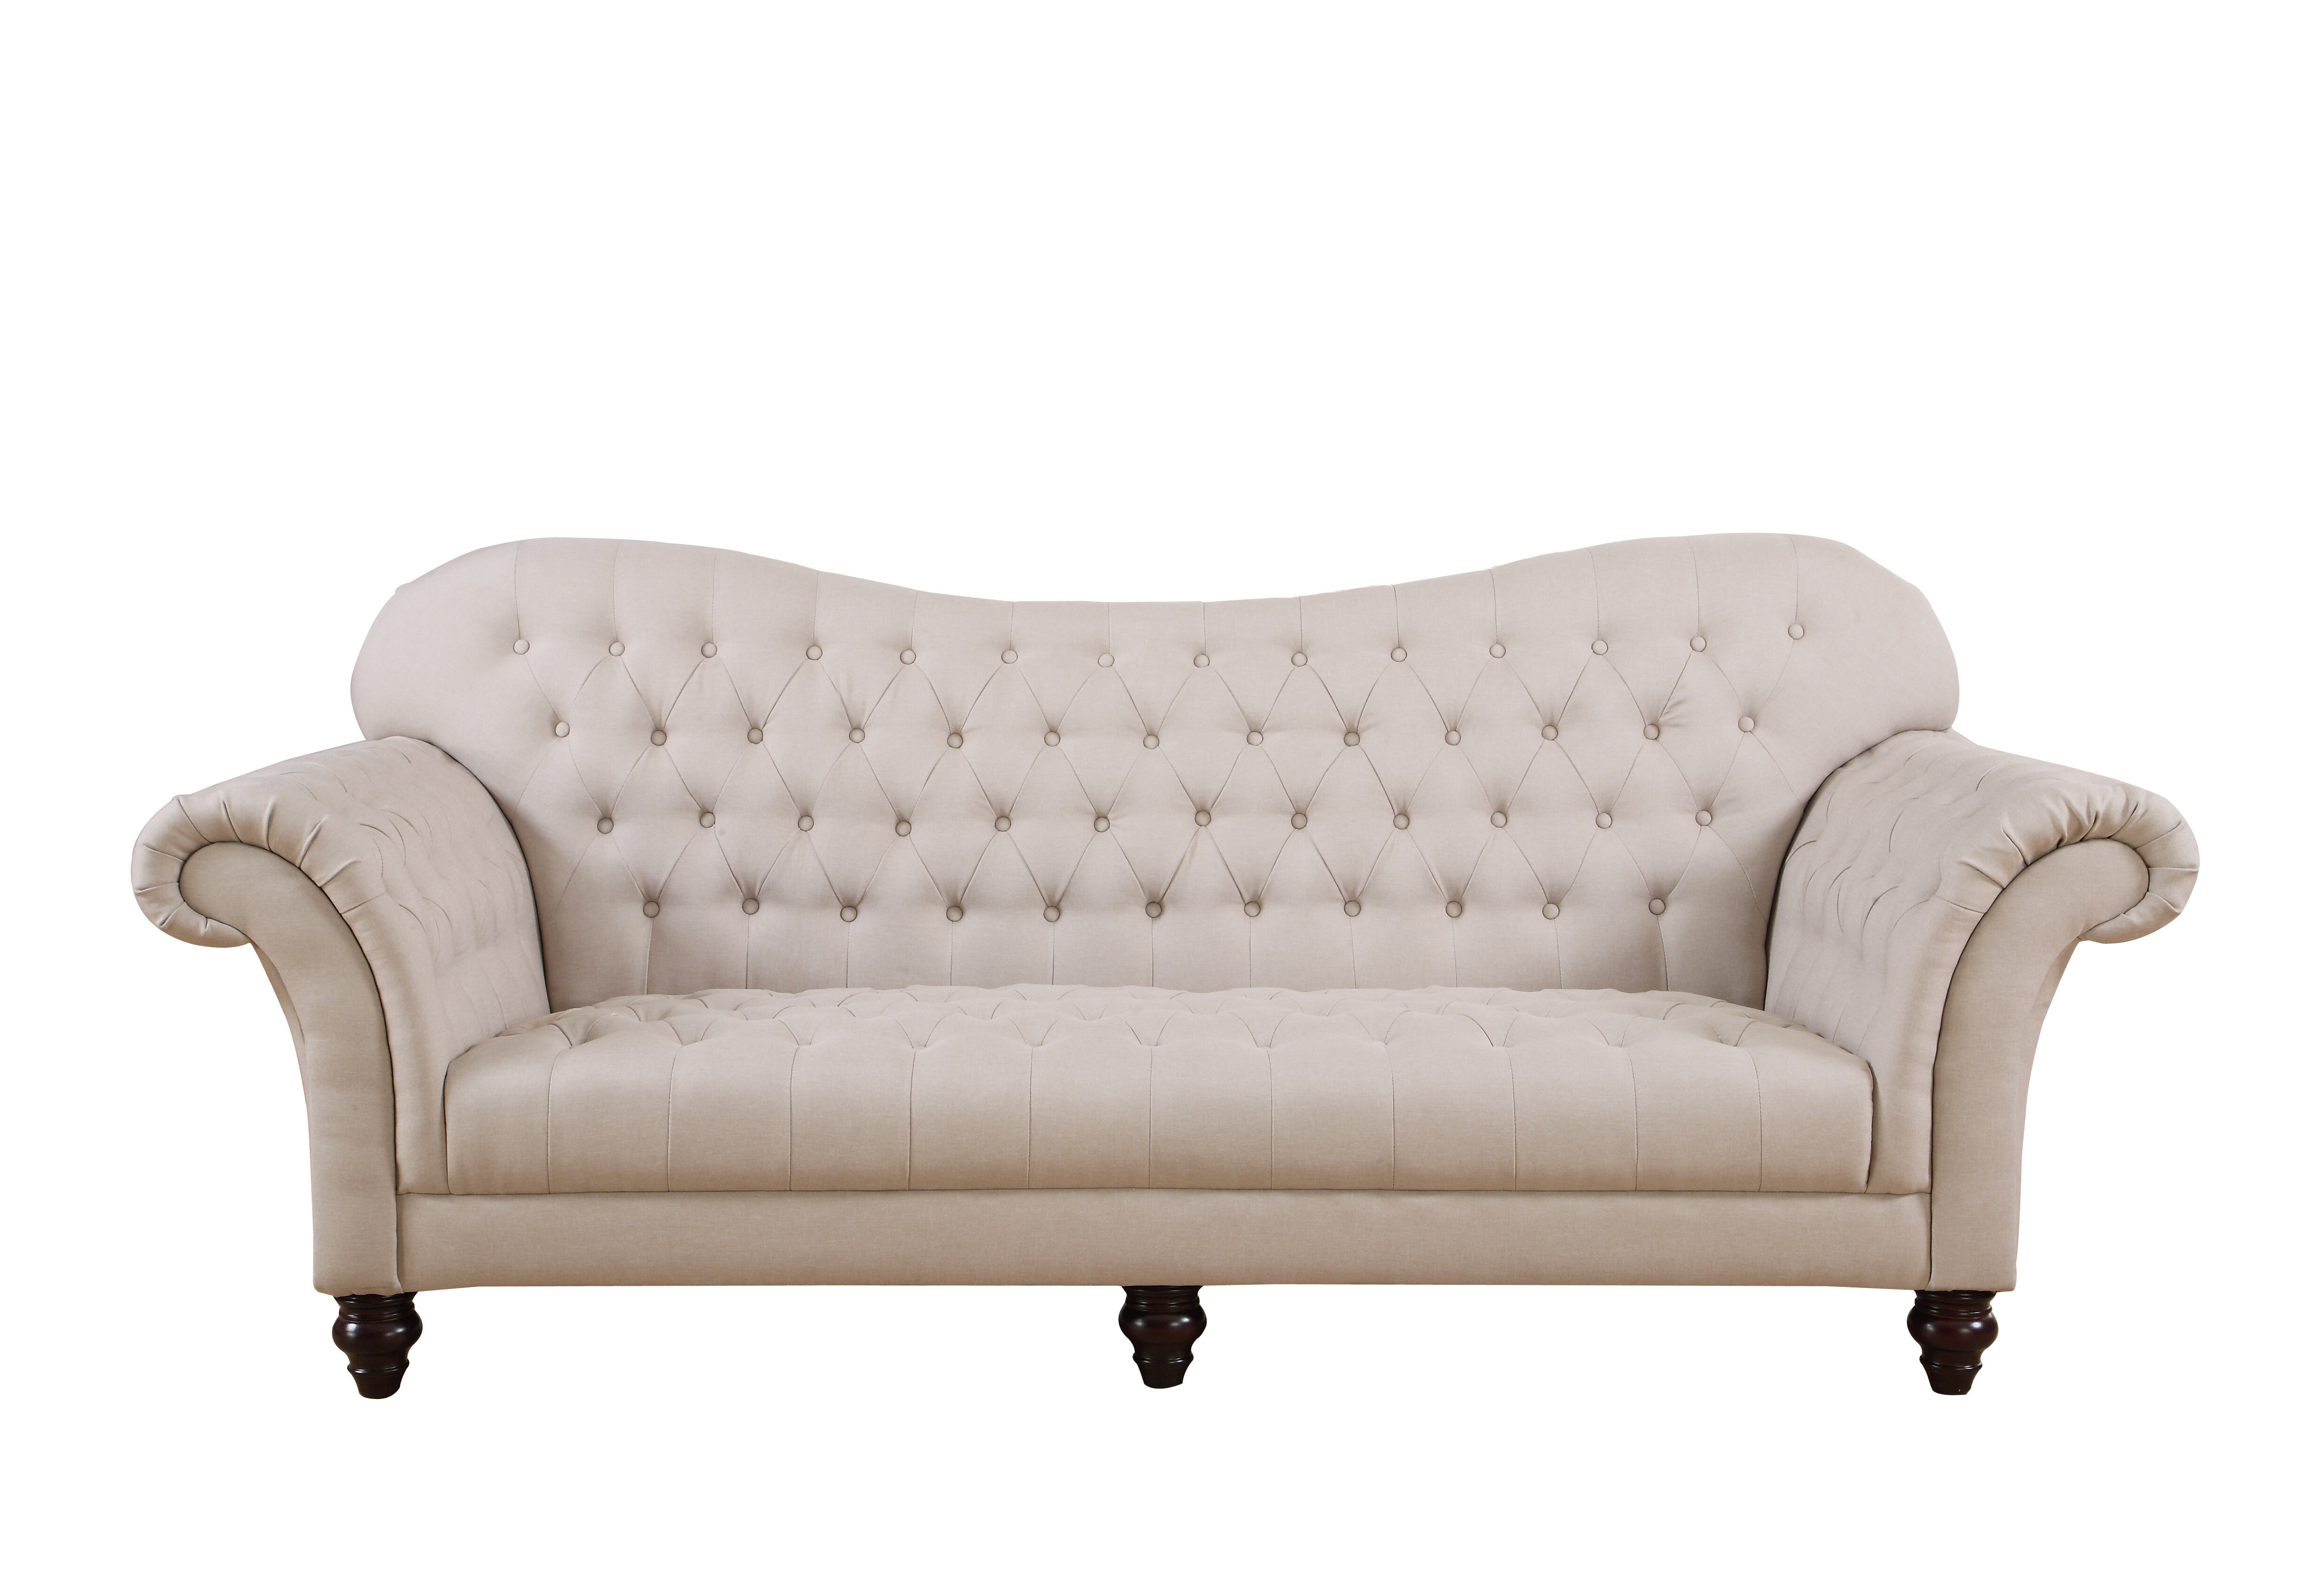 classic tufted real leather tufted victorian sofa